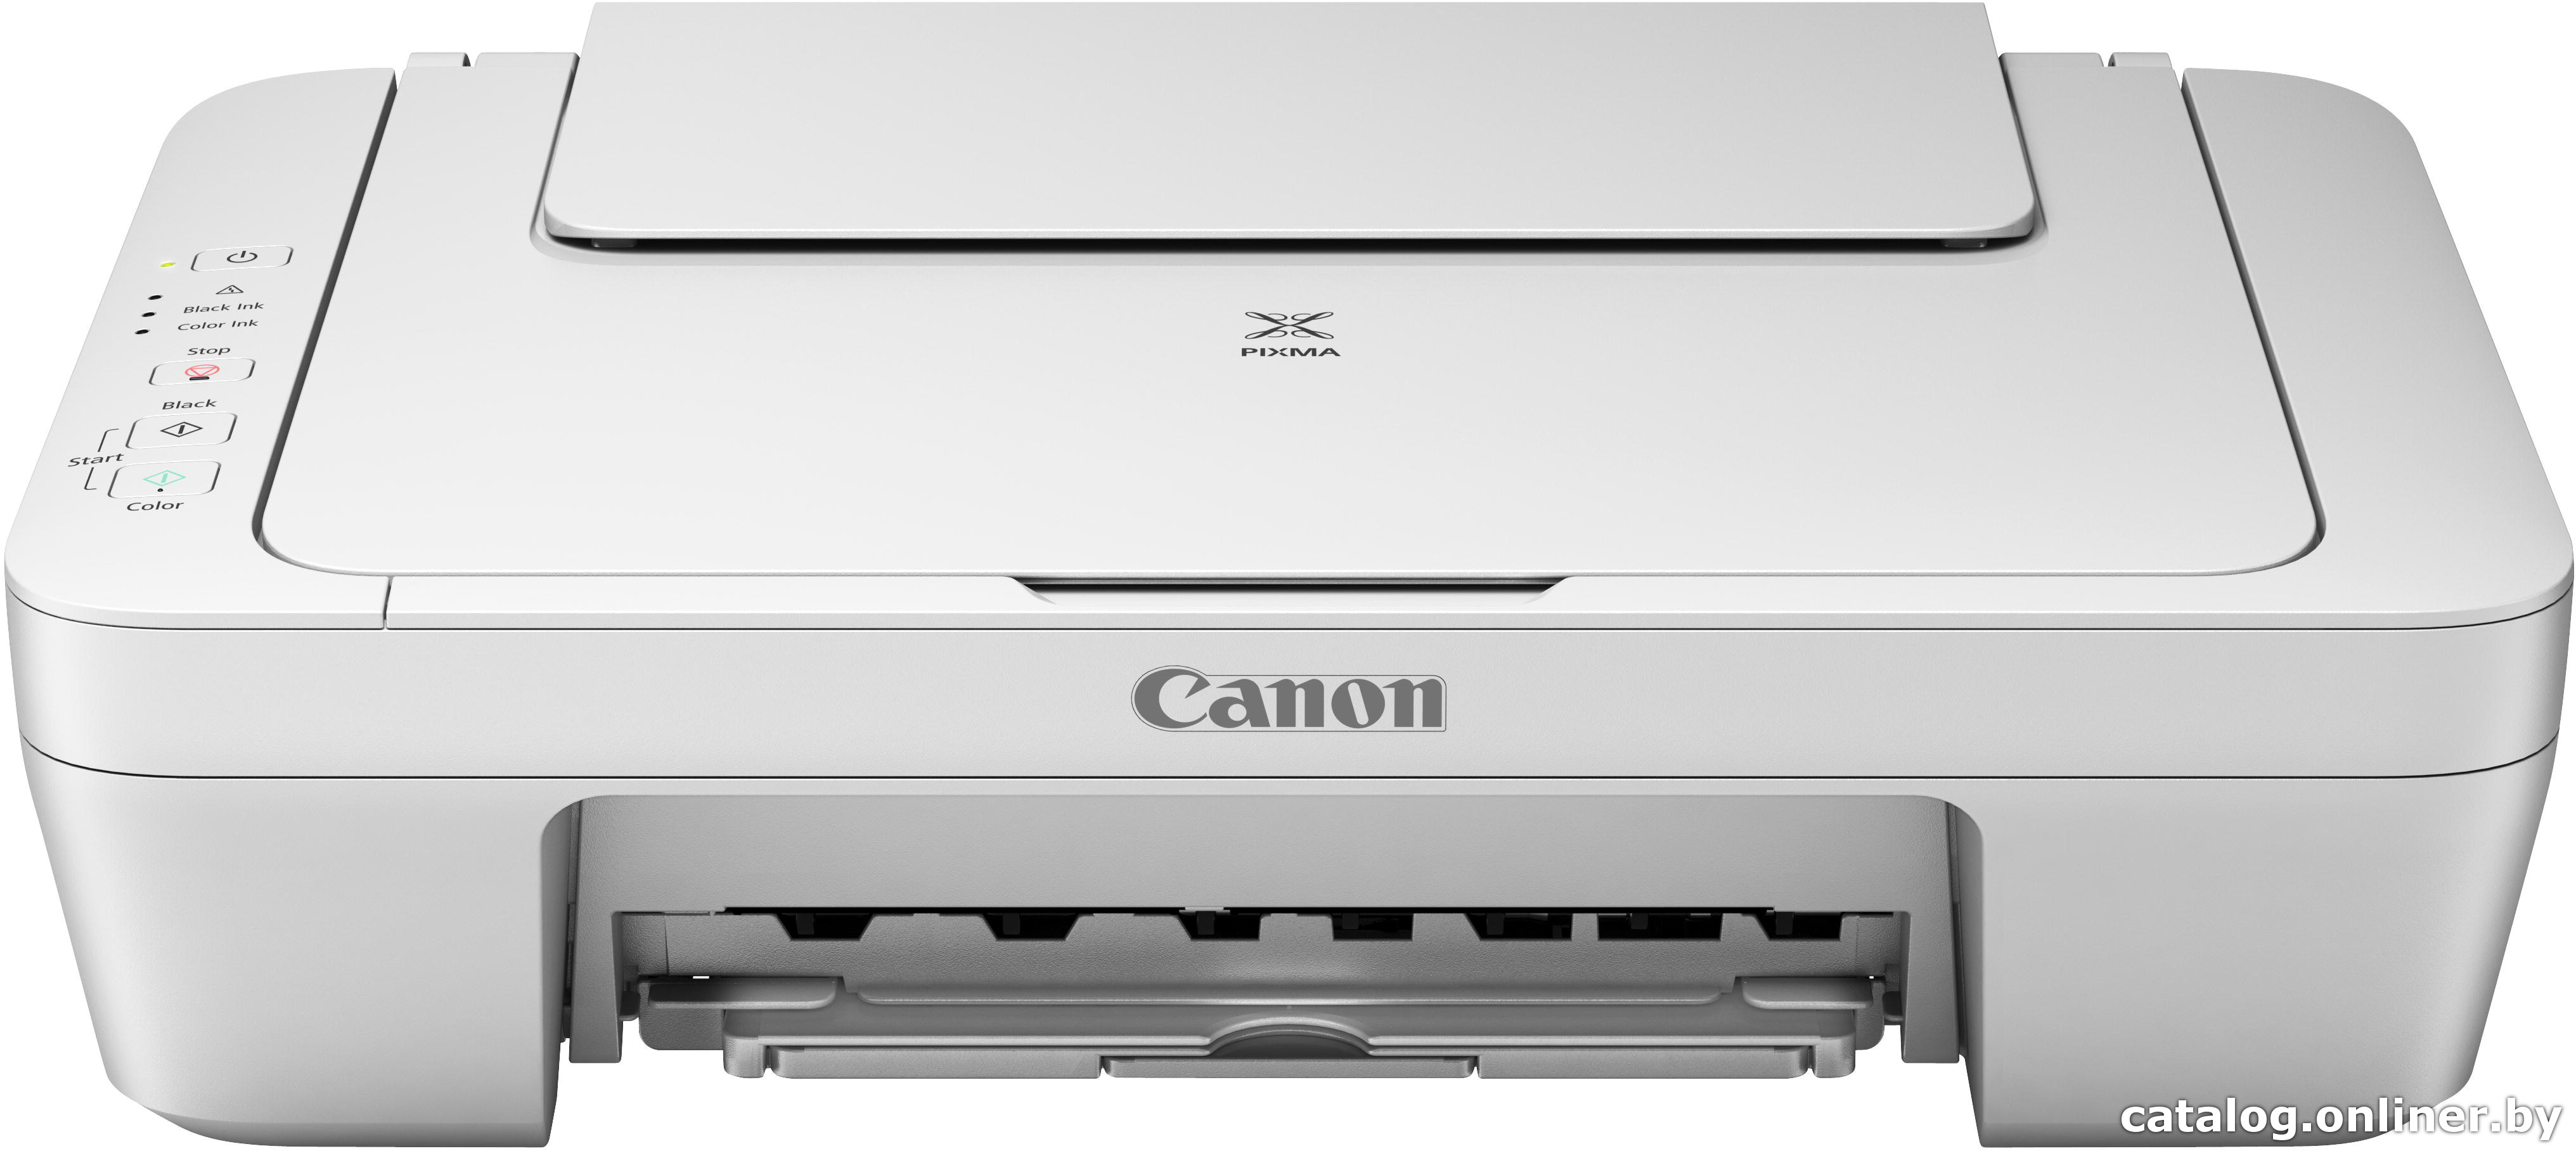 Canon MG2540S Driver Mac Sierra How-to Download and Install - Featured